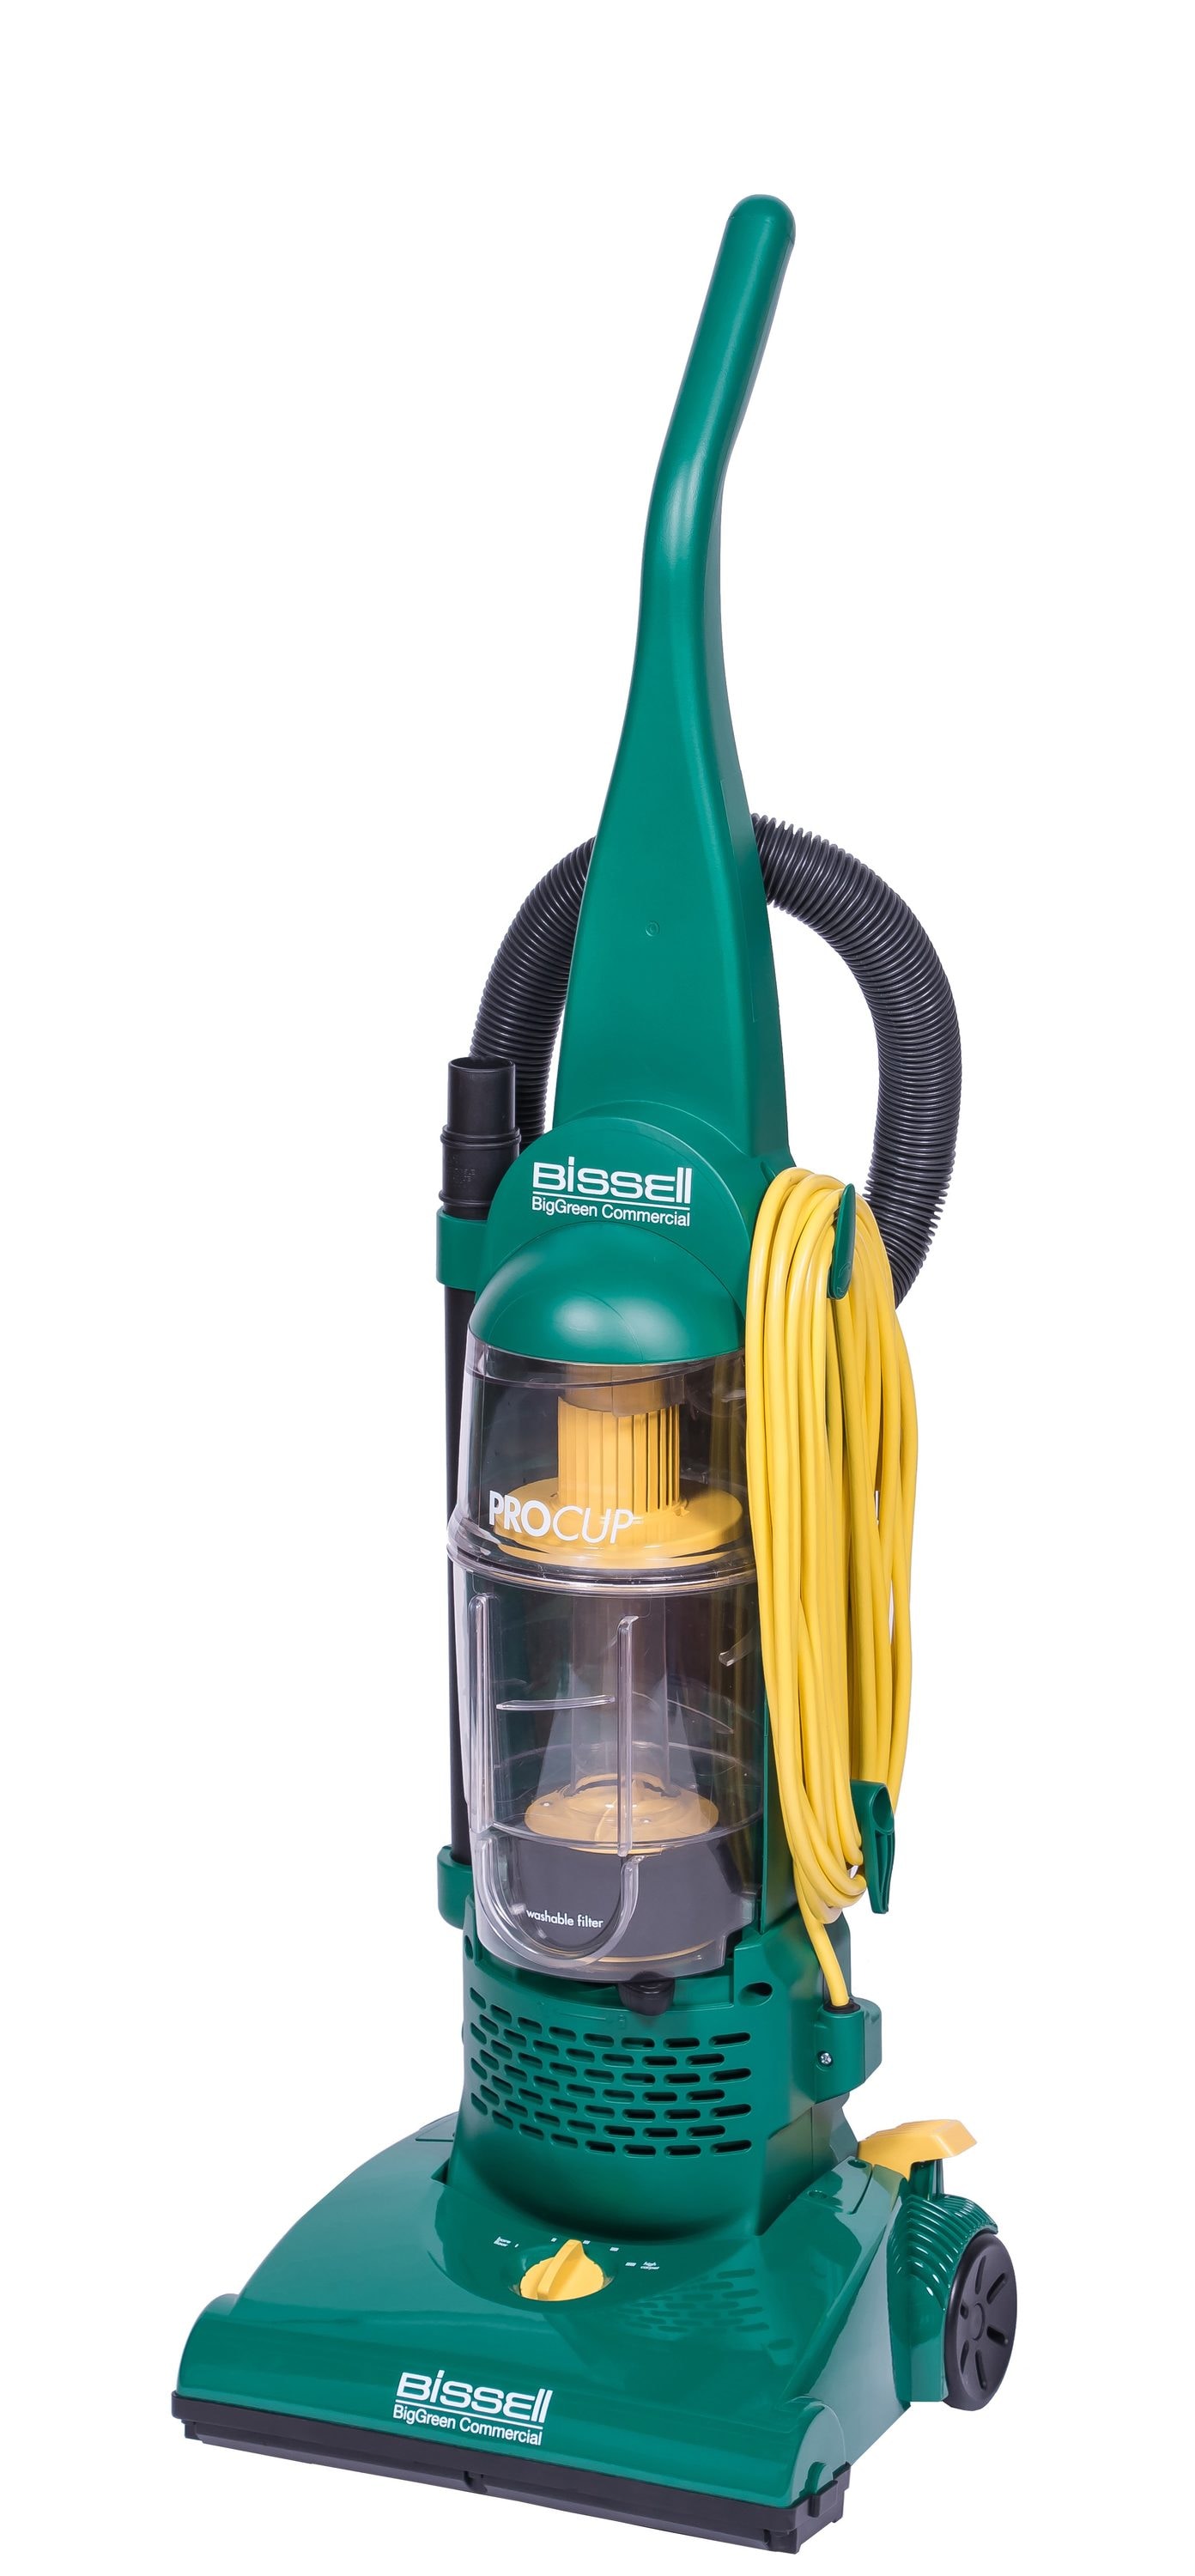 Procup Commercial Corded Bagless Upright Vacuum in Green | - BISSELL BGU1937T